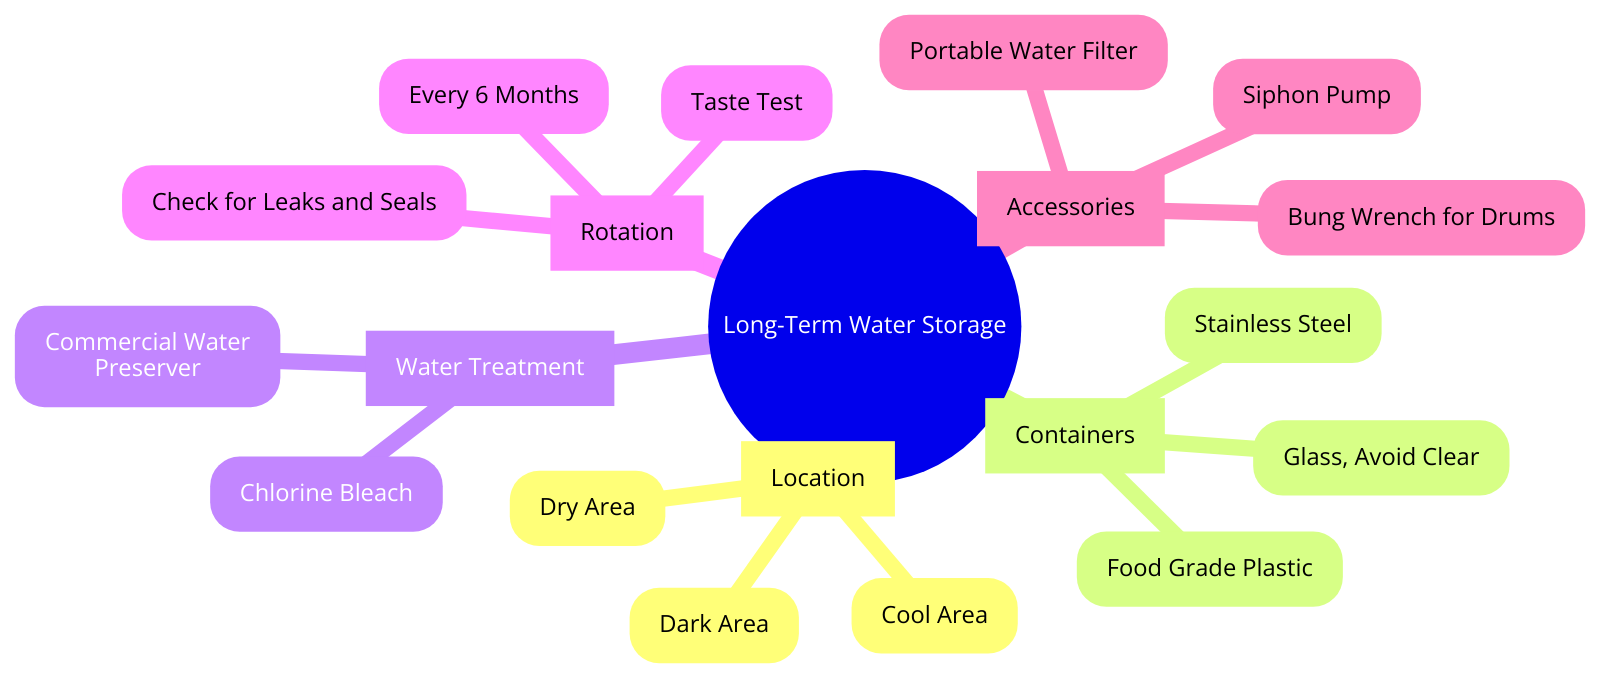 the ideal setup for long-term water storage